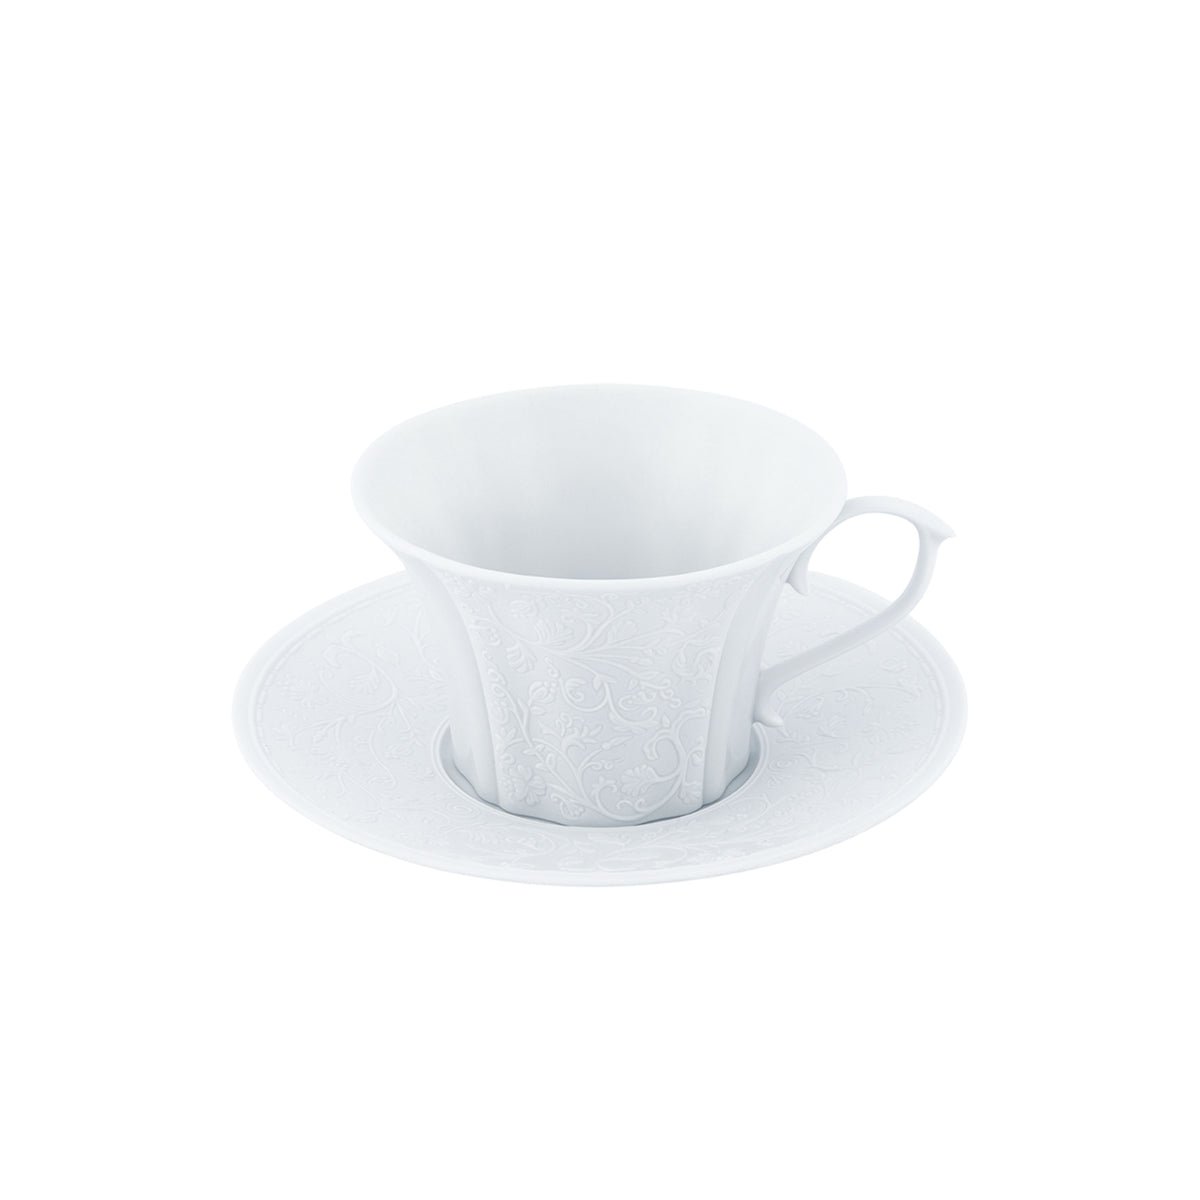 SWAN - Coffee cup and saucer